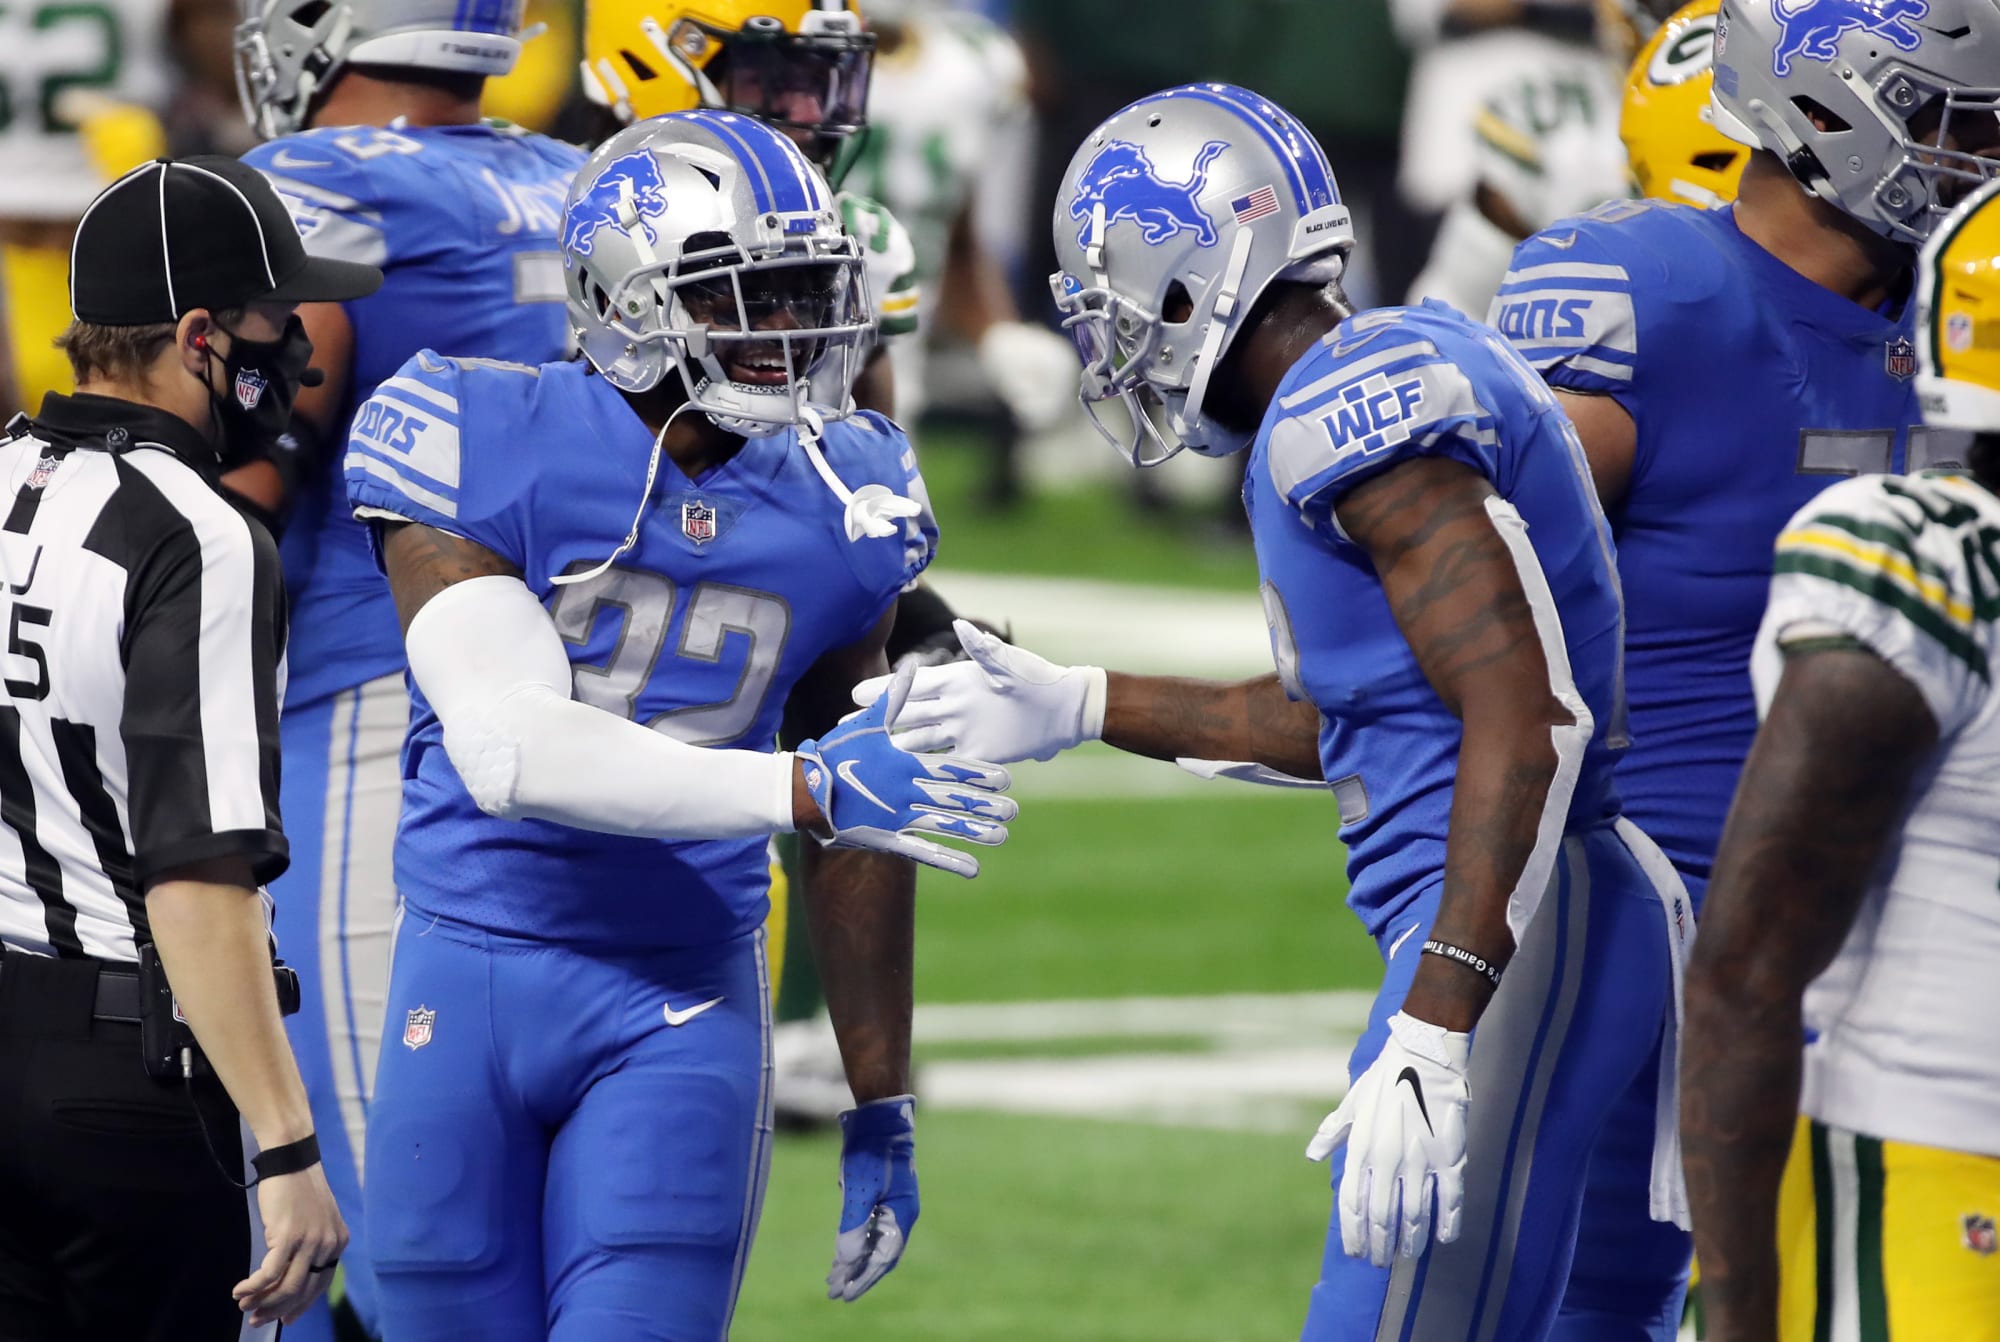 Lions new offensive attack should rely heavily on run game